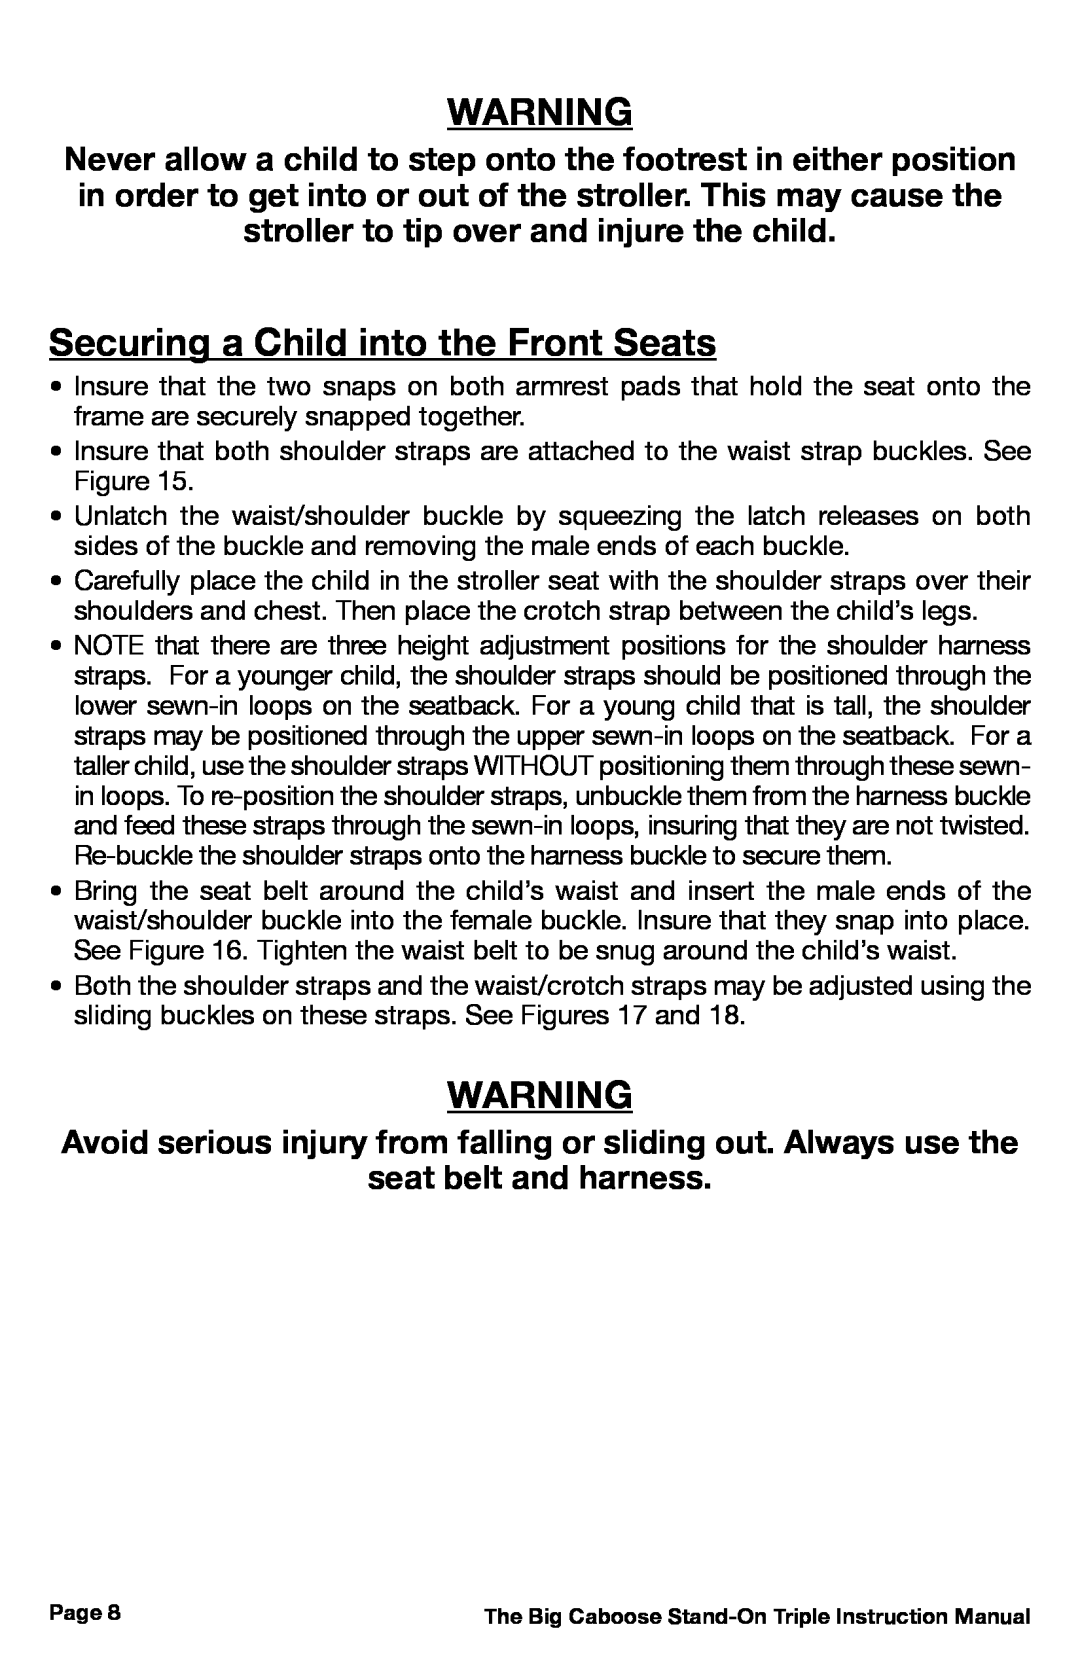 Chicco 437, 431 Securing a Child into the Front Seats, Avoid serious injury from falling or sliding out. Always use the 